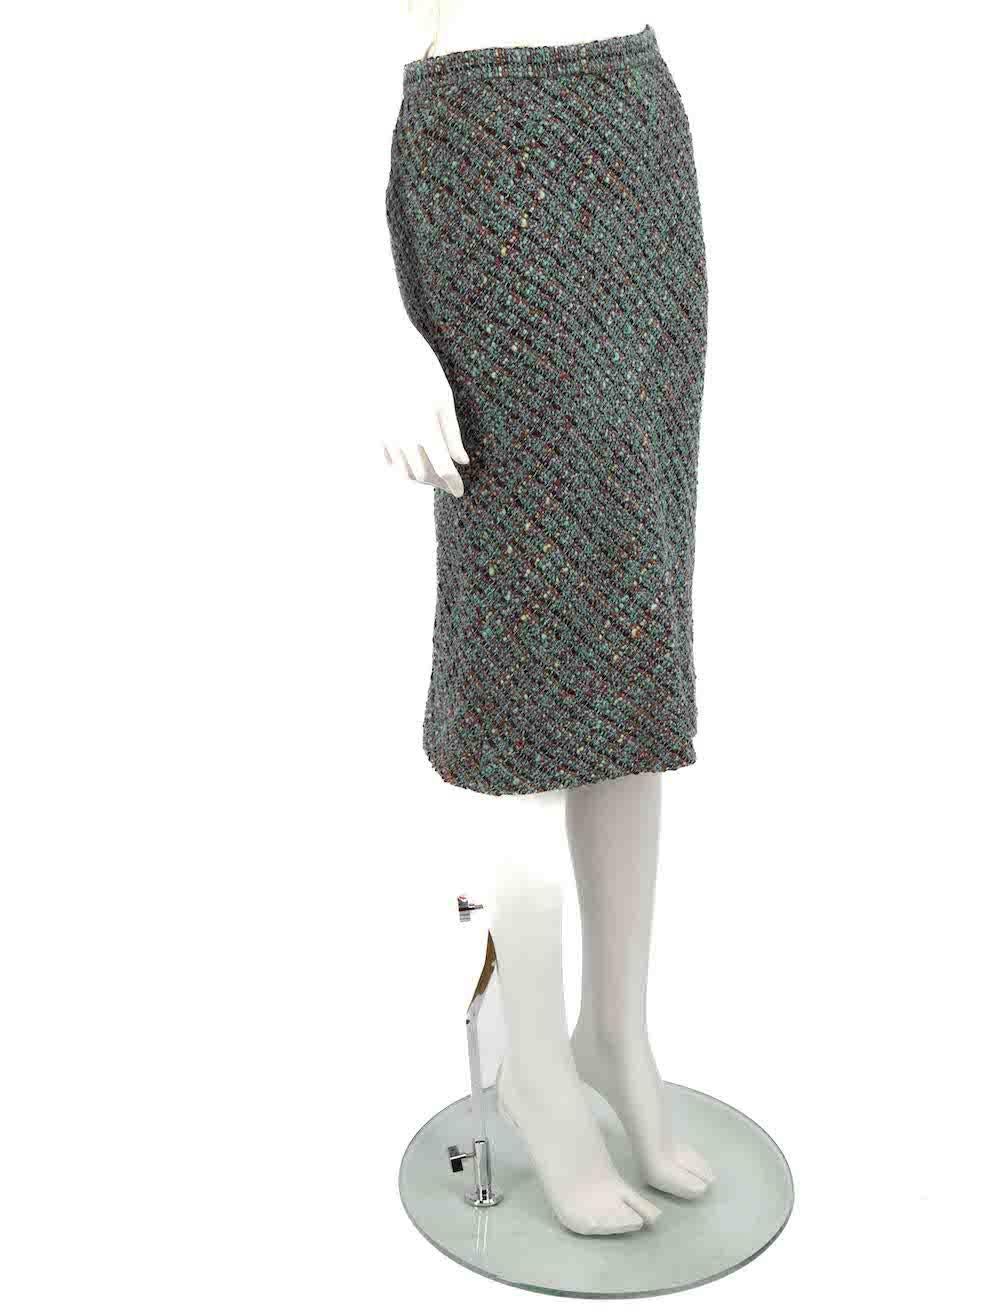 CONDITION is Very good. Minimal wear to skirt is evident. Some stretching to the weave at hem on this used Dolce & Gabbana designer resale item.
 
 Details
 Blue
 Wool tweed
 Pencil skirt
 Midi
 Side zip and snap button fastening
 
 
 Made in Italy
